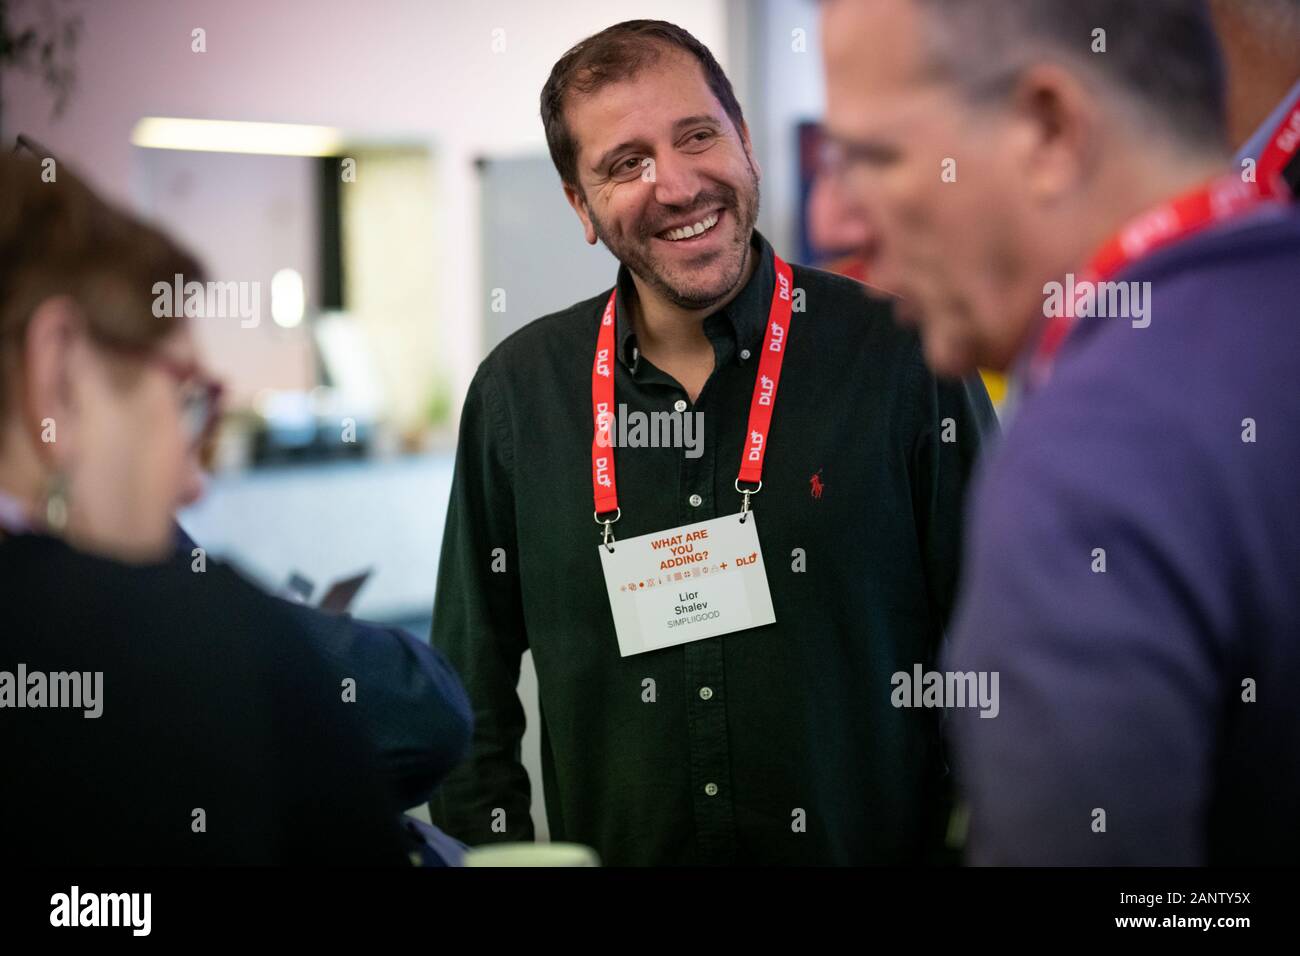 Munich, Germany. 19th Jan, 2020. Lior Shalev (SimpliiGood) smiles during a discussion at DLD Munich Conference 2020, Europe's big innovation conference, Alte Kongresshalle, Munich, January 18- 20, 2020 Picture Alliance for DLD/Hubert Burda Media | usage worldwide Credit: dpa/Alamy Live News Stock Photo